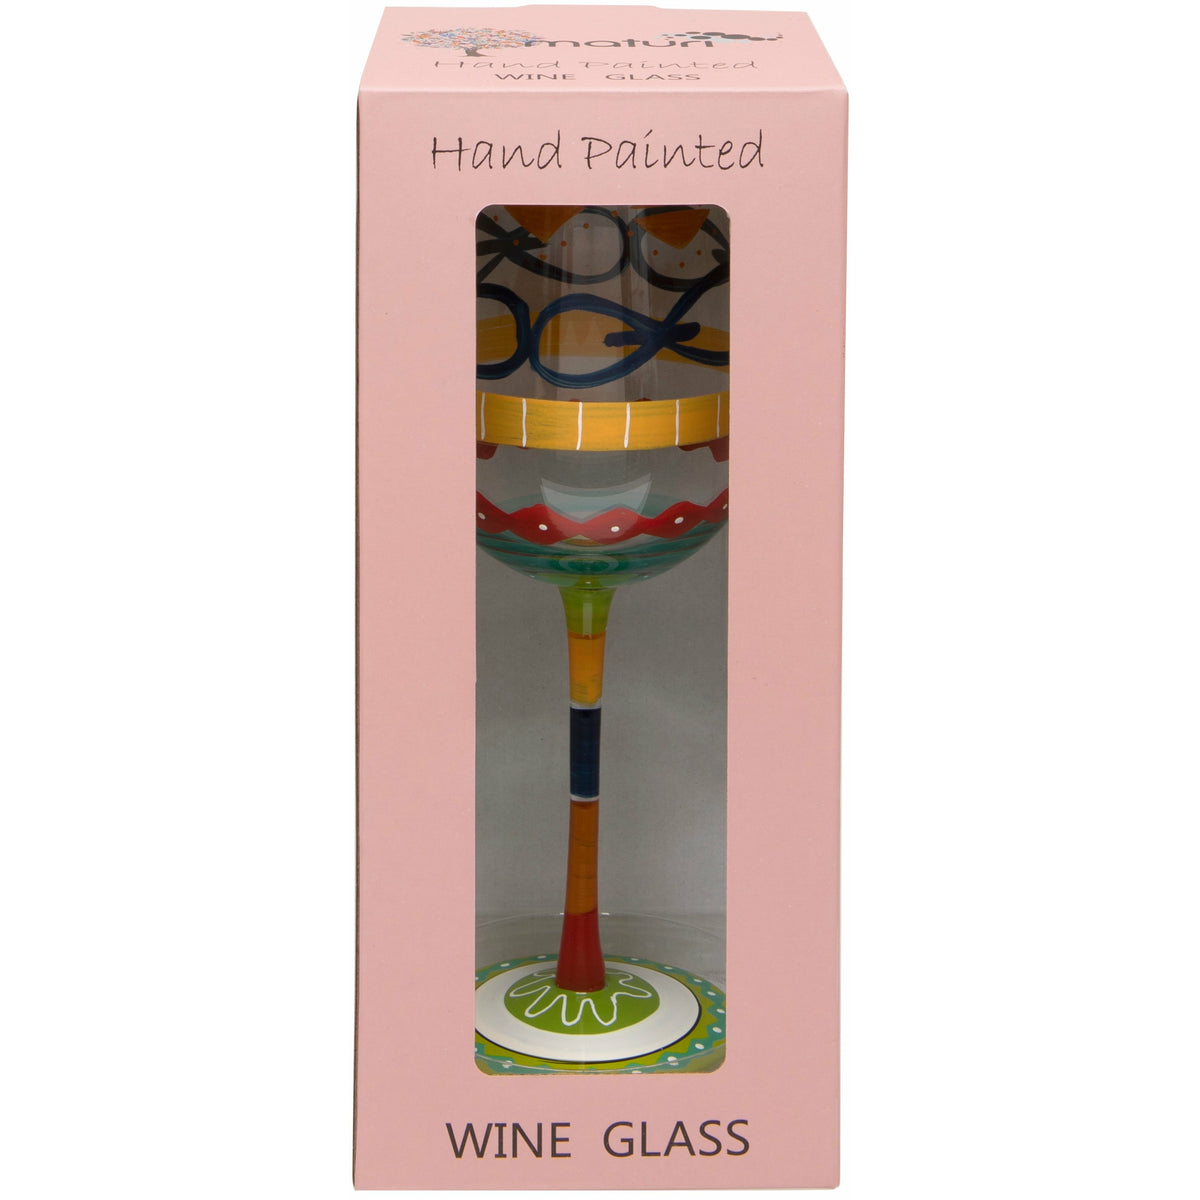 Hand Painted Multi Print Wine Glass in Box